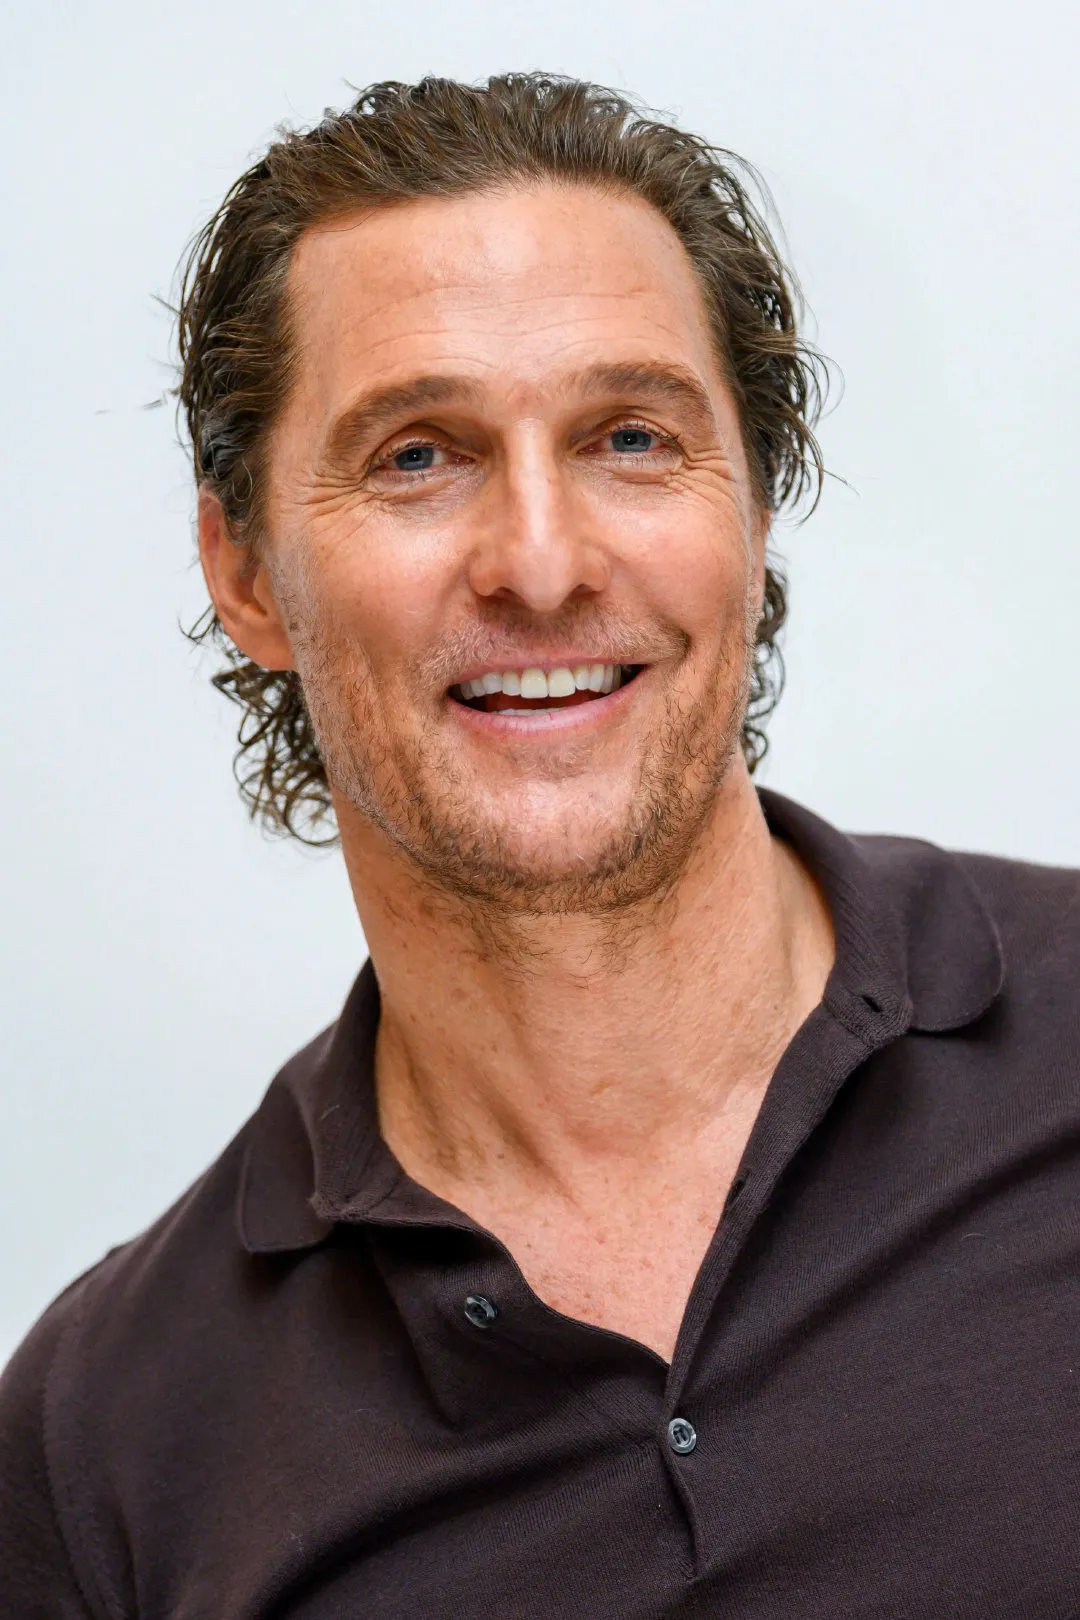 Football-themed 'Dallas Sting' starring Matthew McConaughey has been dropped | FMV6